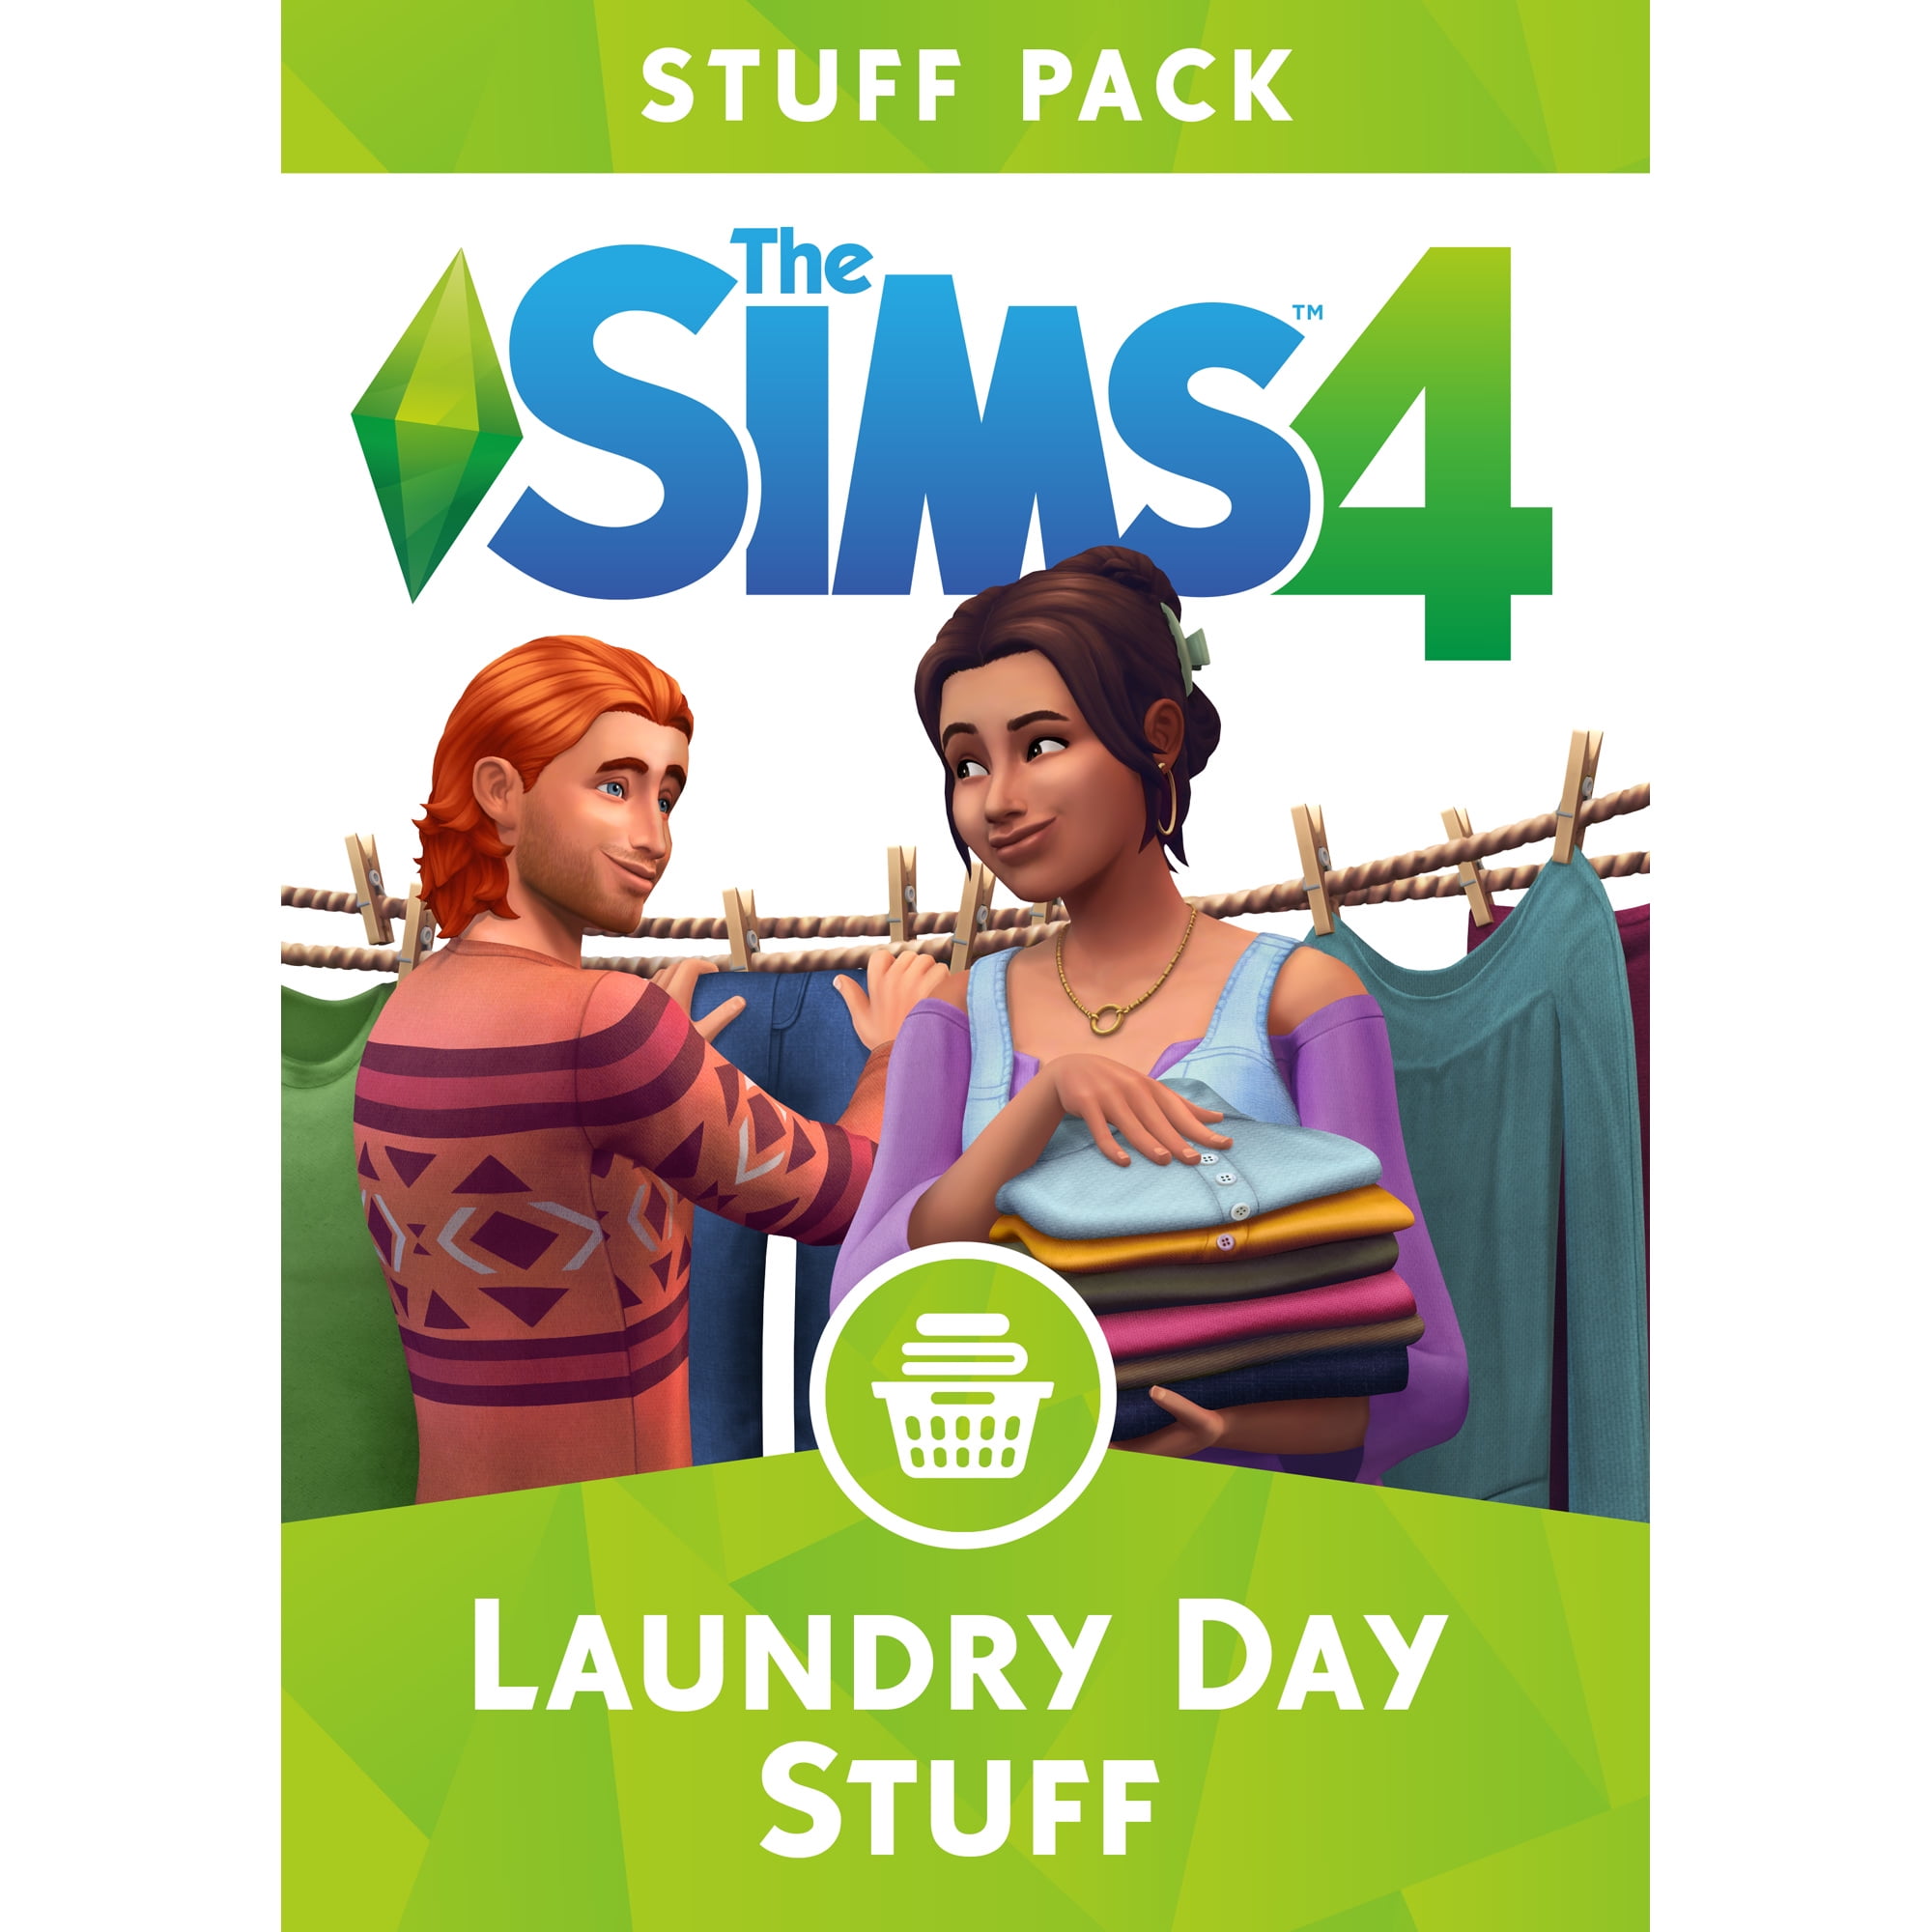 Laundry day. Laundry Day SIMS 4. The SIMS 4 день стирки. SIMS 4 Laundry Day stuff. Прачечная симс 4.